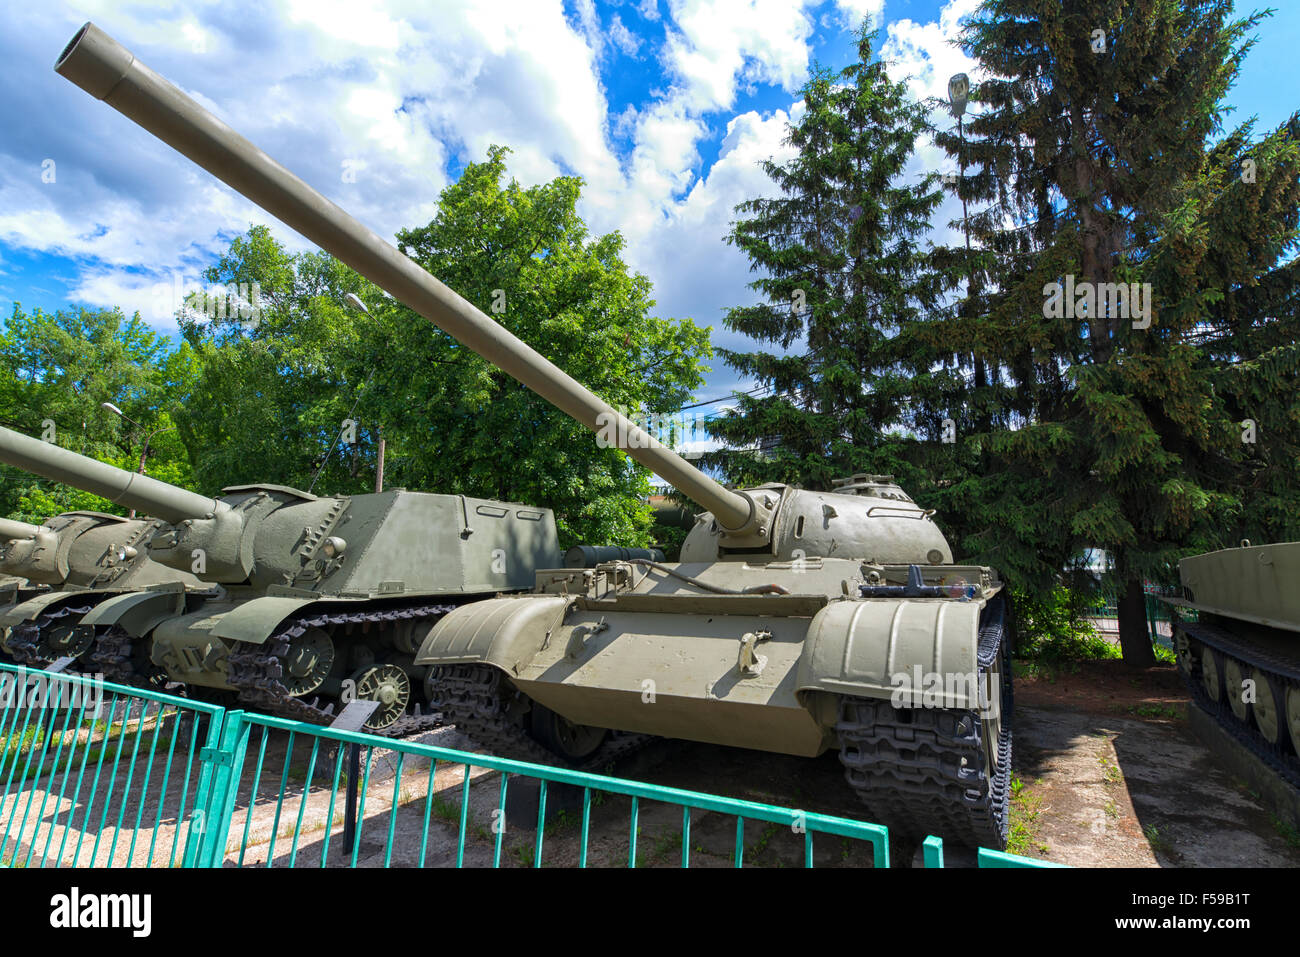 T-54 Main Battle Tank at Russian Army Museum in Moscow, Russia Stock Photo